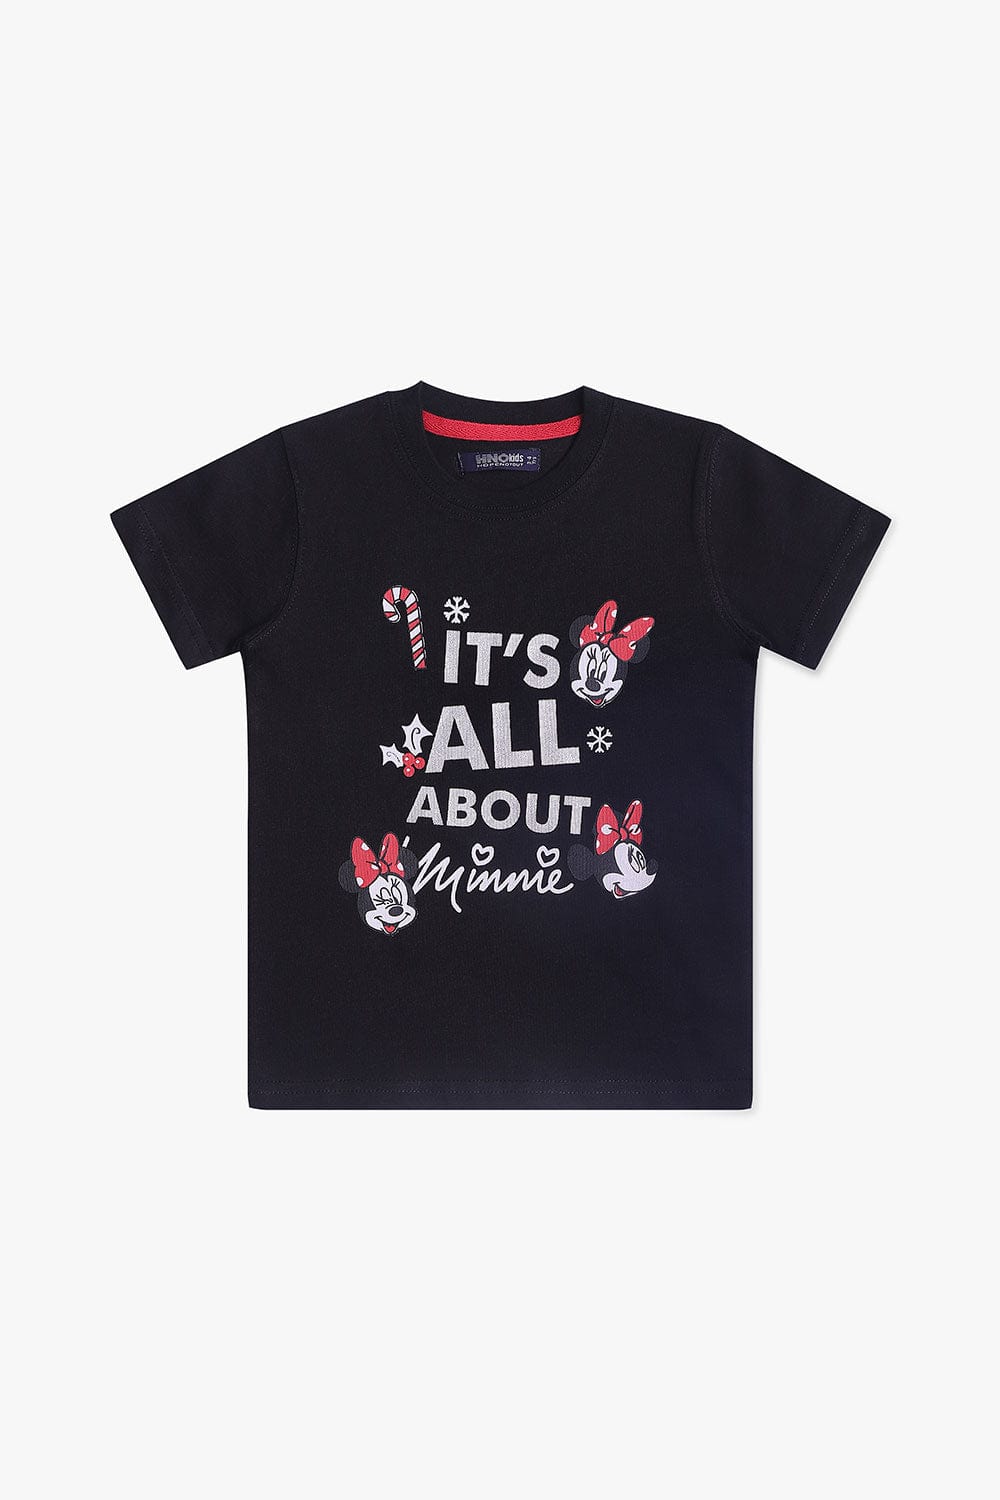 Hope Not Out by Shahid Afridi Girls Knit T-Shirt Minnie Mouse T-Shirt